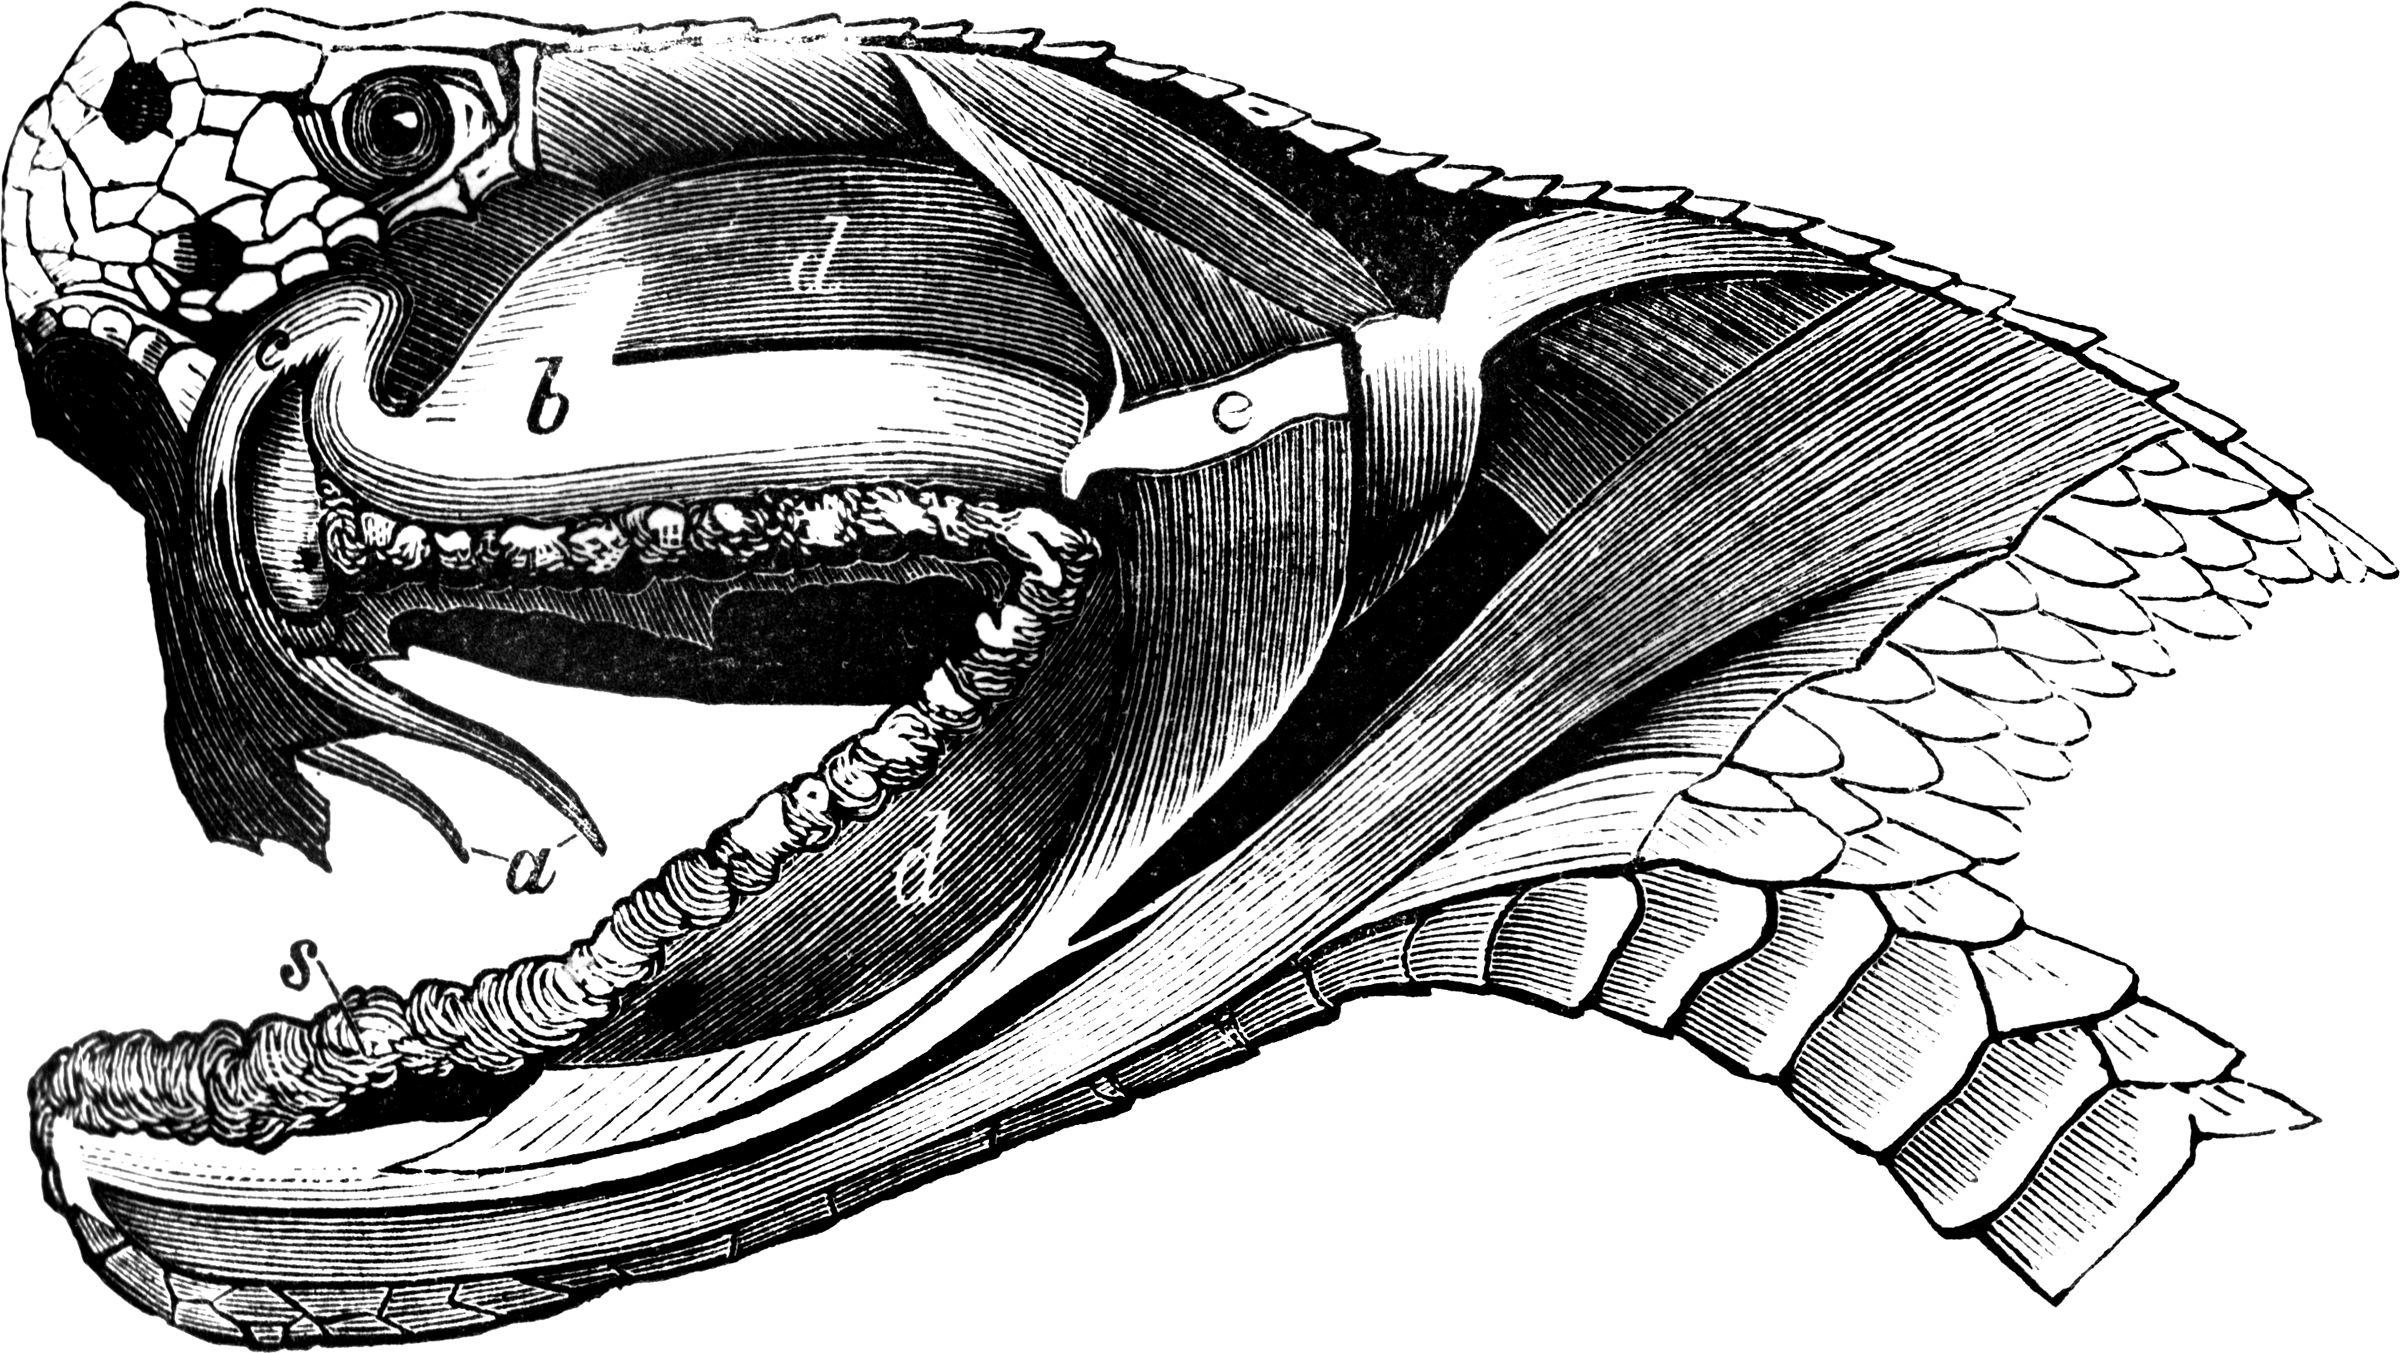 Cross section of a viper head | ClipArt ETC